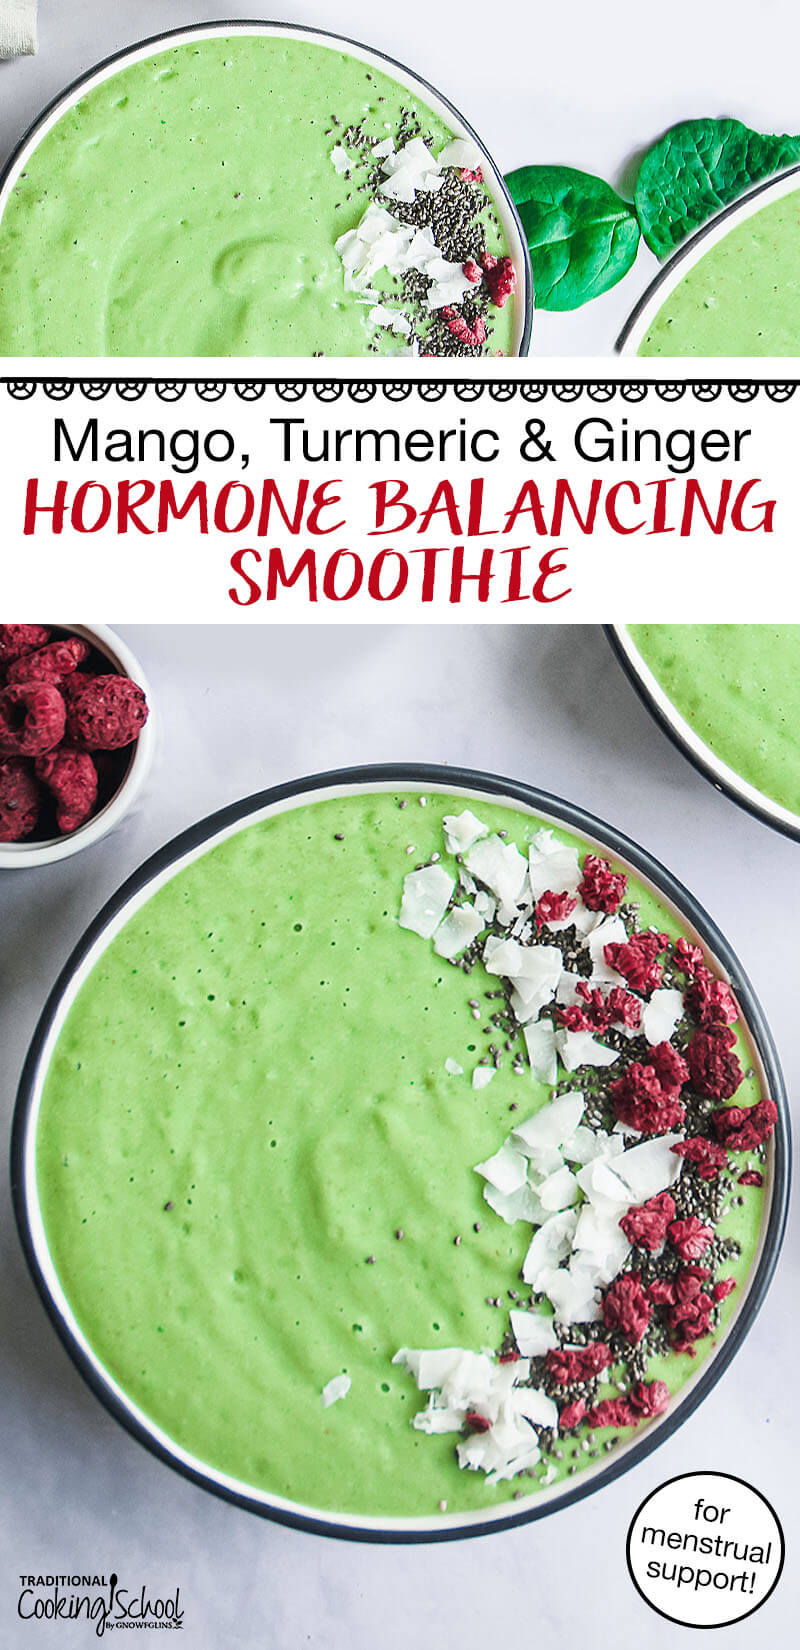 photo collage of a bright green smoothie bowl garnished with coconut, freeze-dried raspberries, and chia seeds. Text overlay says: "Mango, Turmeric & Ginger Hormone Balancing Smoothie (for menstrual support!)"